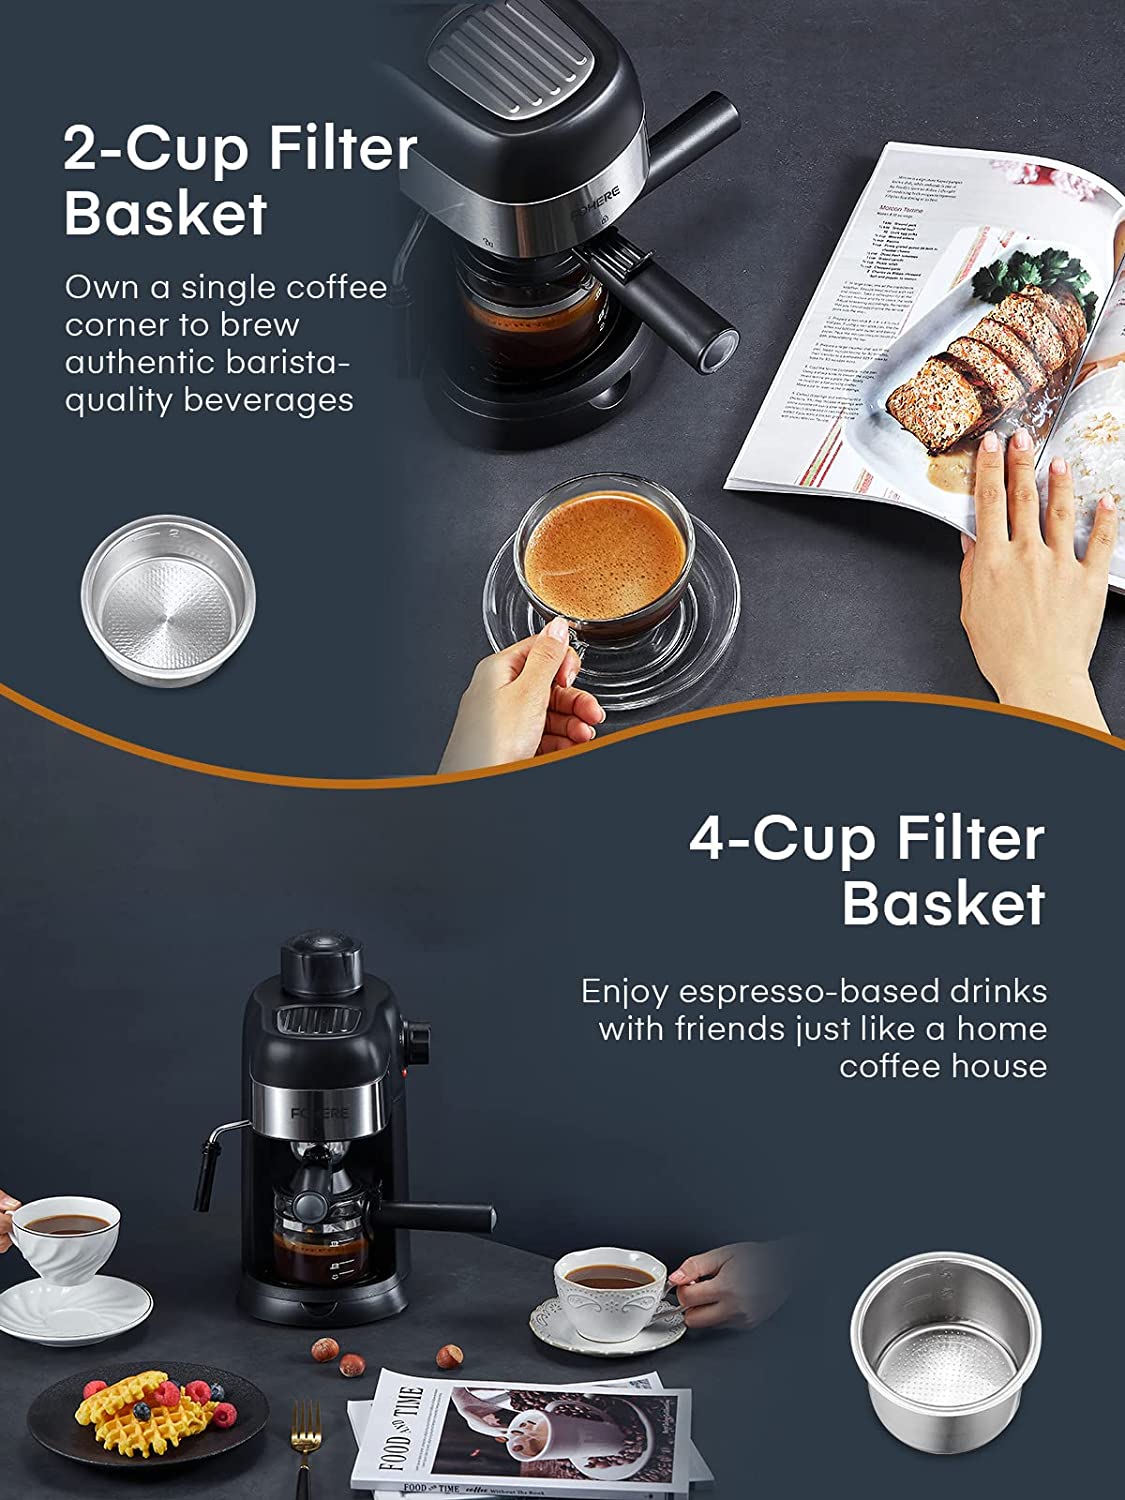 2 cup filter basket, FOHERE Espresso Machine, 3.5 Bar 4 Cup Steam Espresso Machine, Espresso and Cappuccino Maker with Milk Frother and Carafe, Professional Compact Coffee Machine for Espresso, Cappuccino, Latte and Mocha